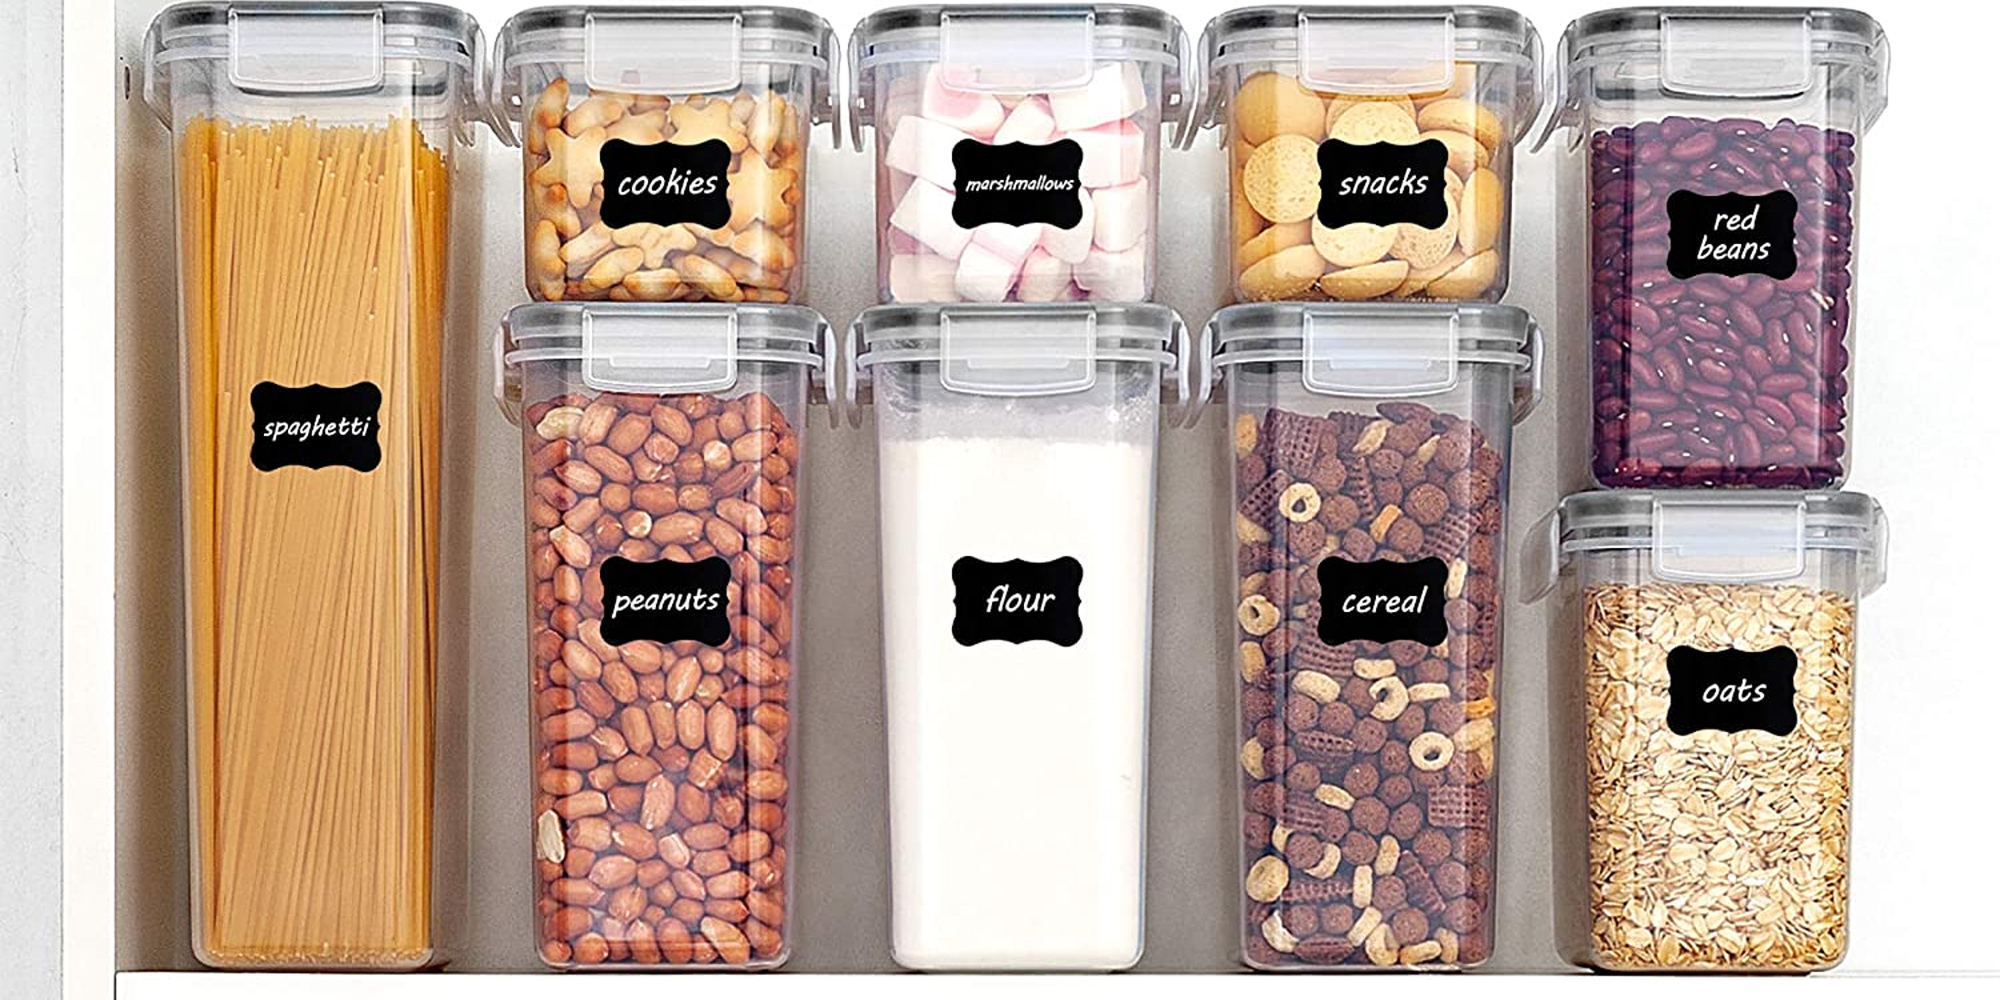 https://9to5toys.com/wp-content/uploads/sites/5/2022/03/pantry-organization.jpg